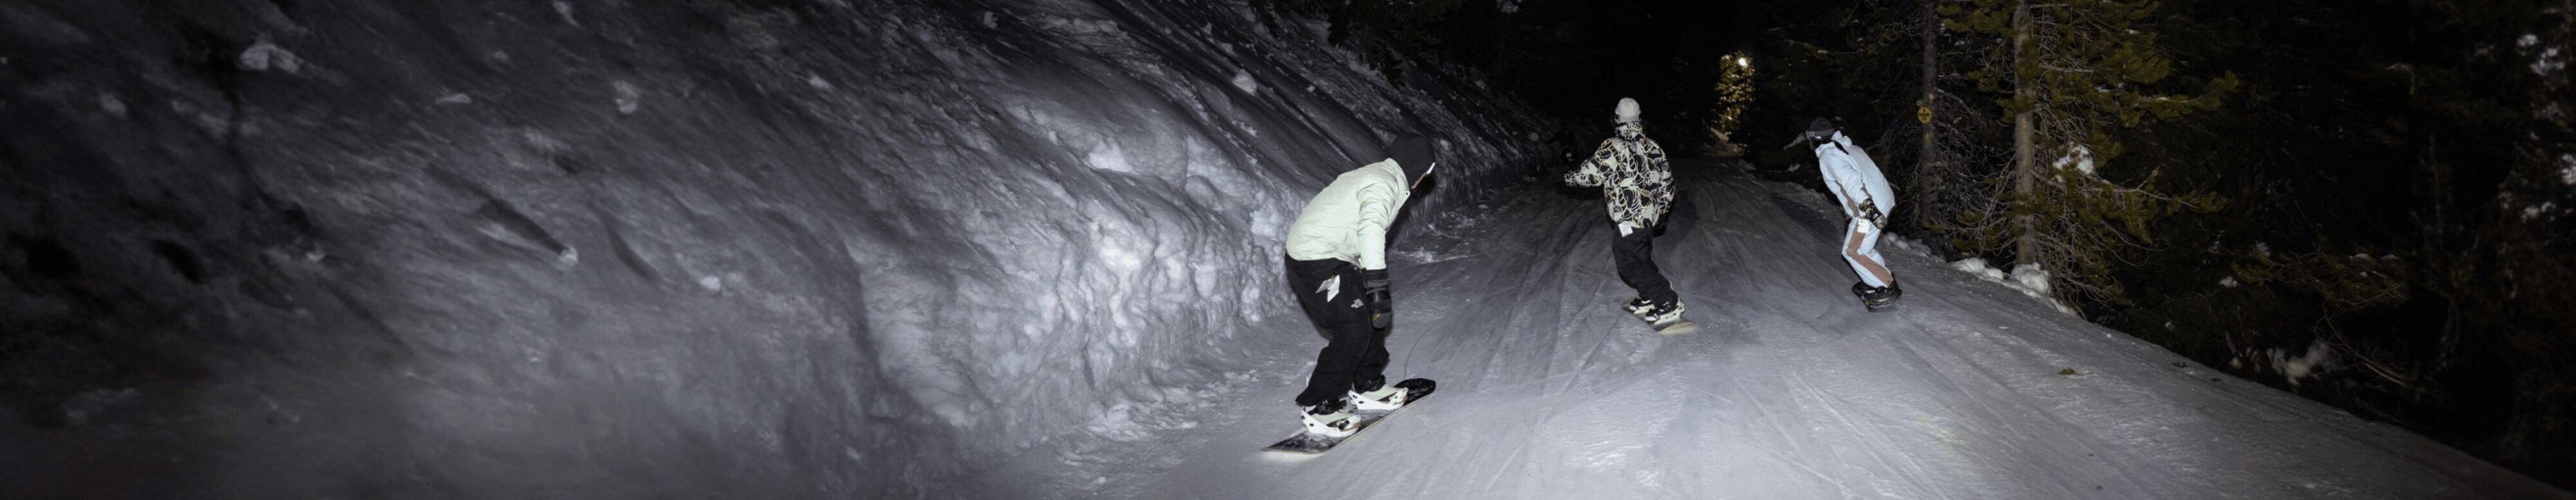 Three snowboarders ride at night in a new freeride collection from The North Face.